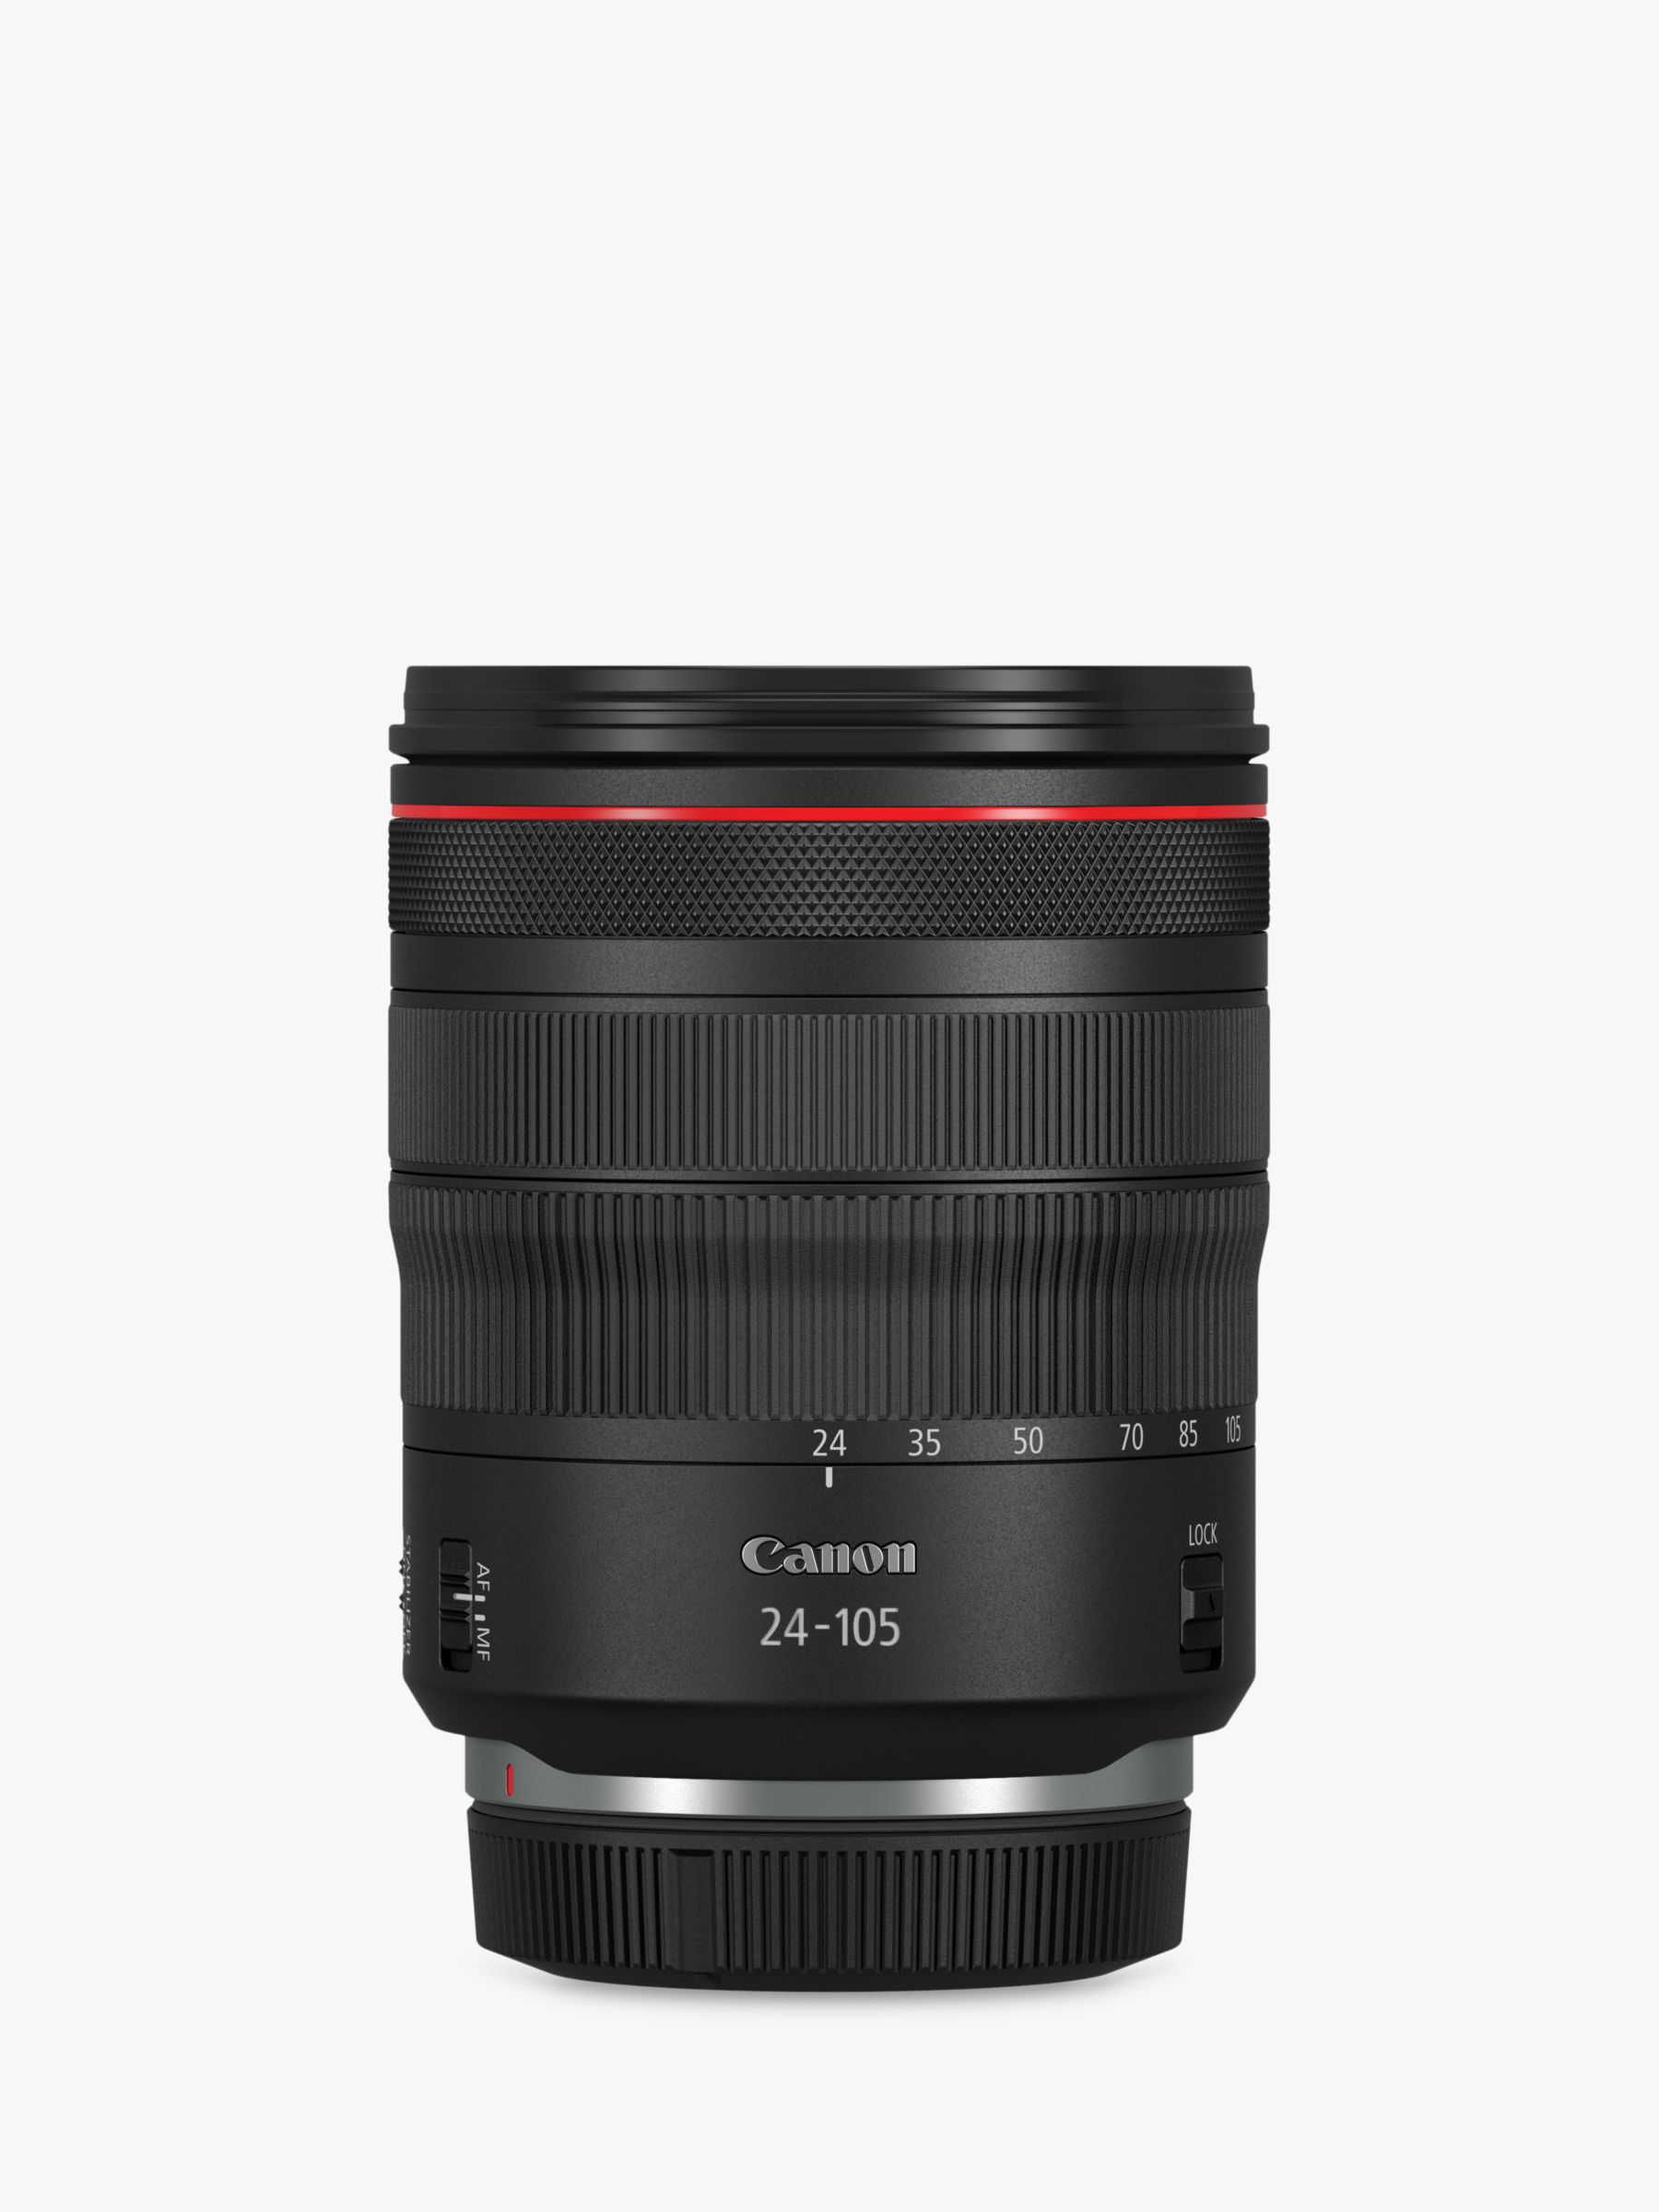 Image of Canon RF 24105mm f4L IS USM Lens